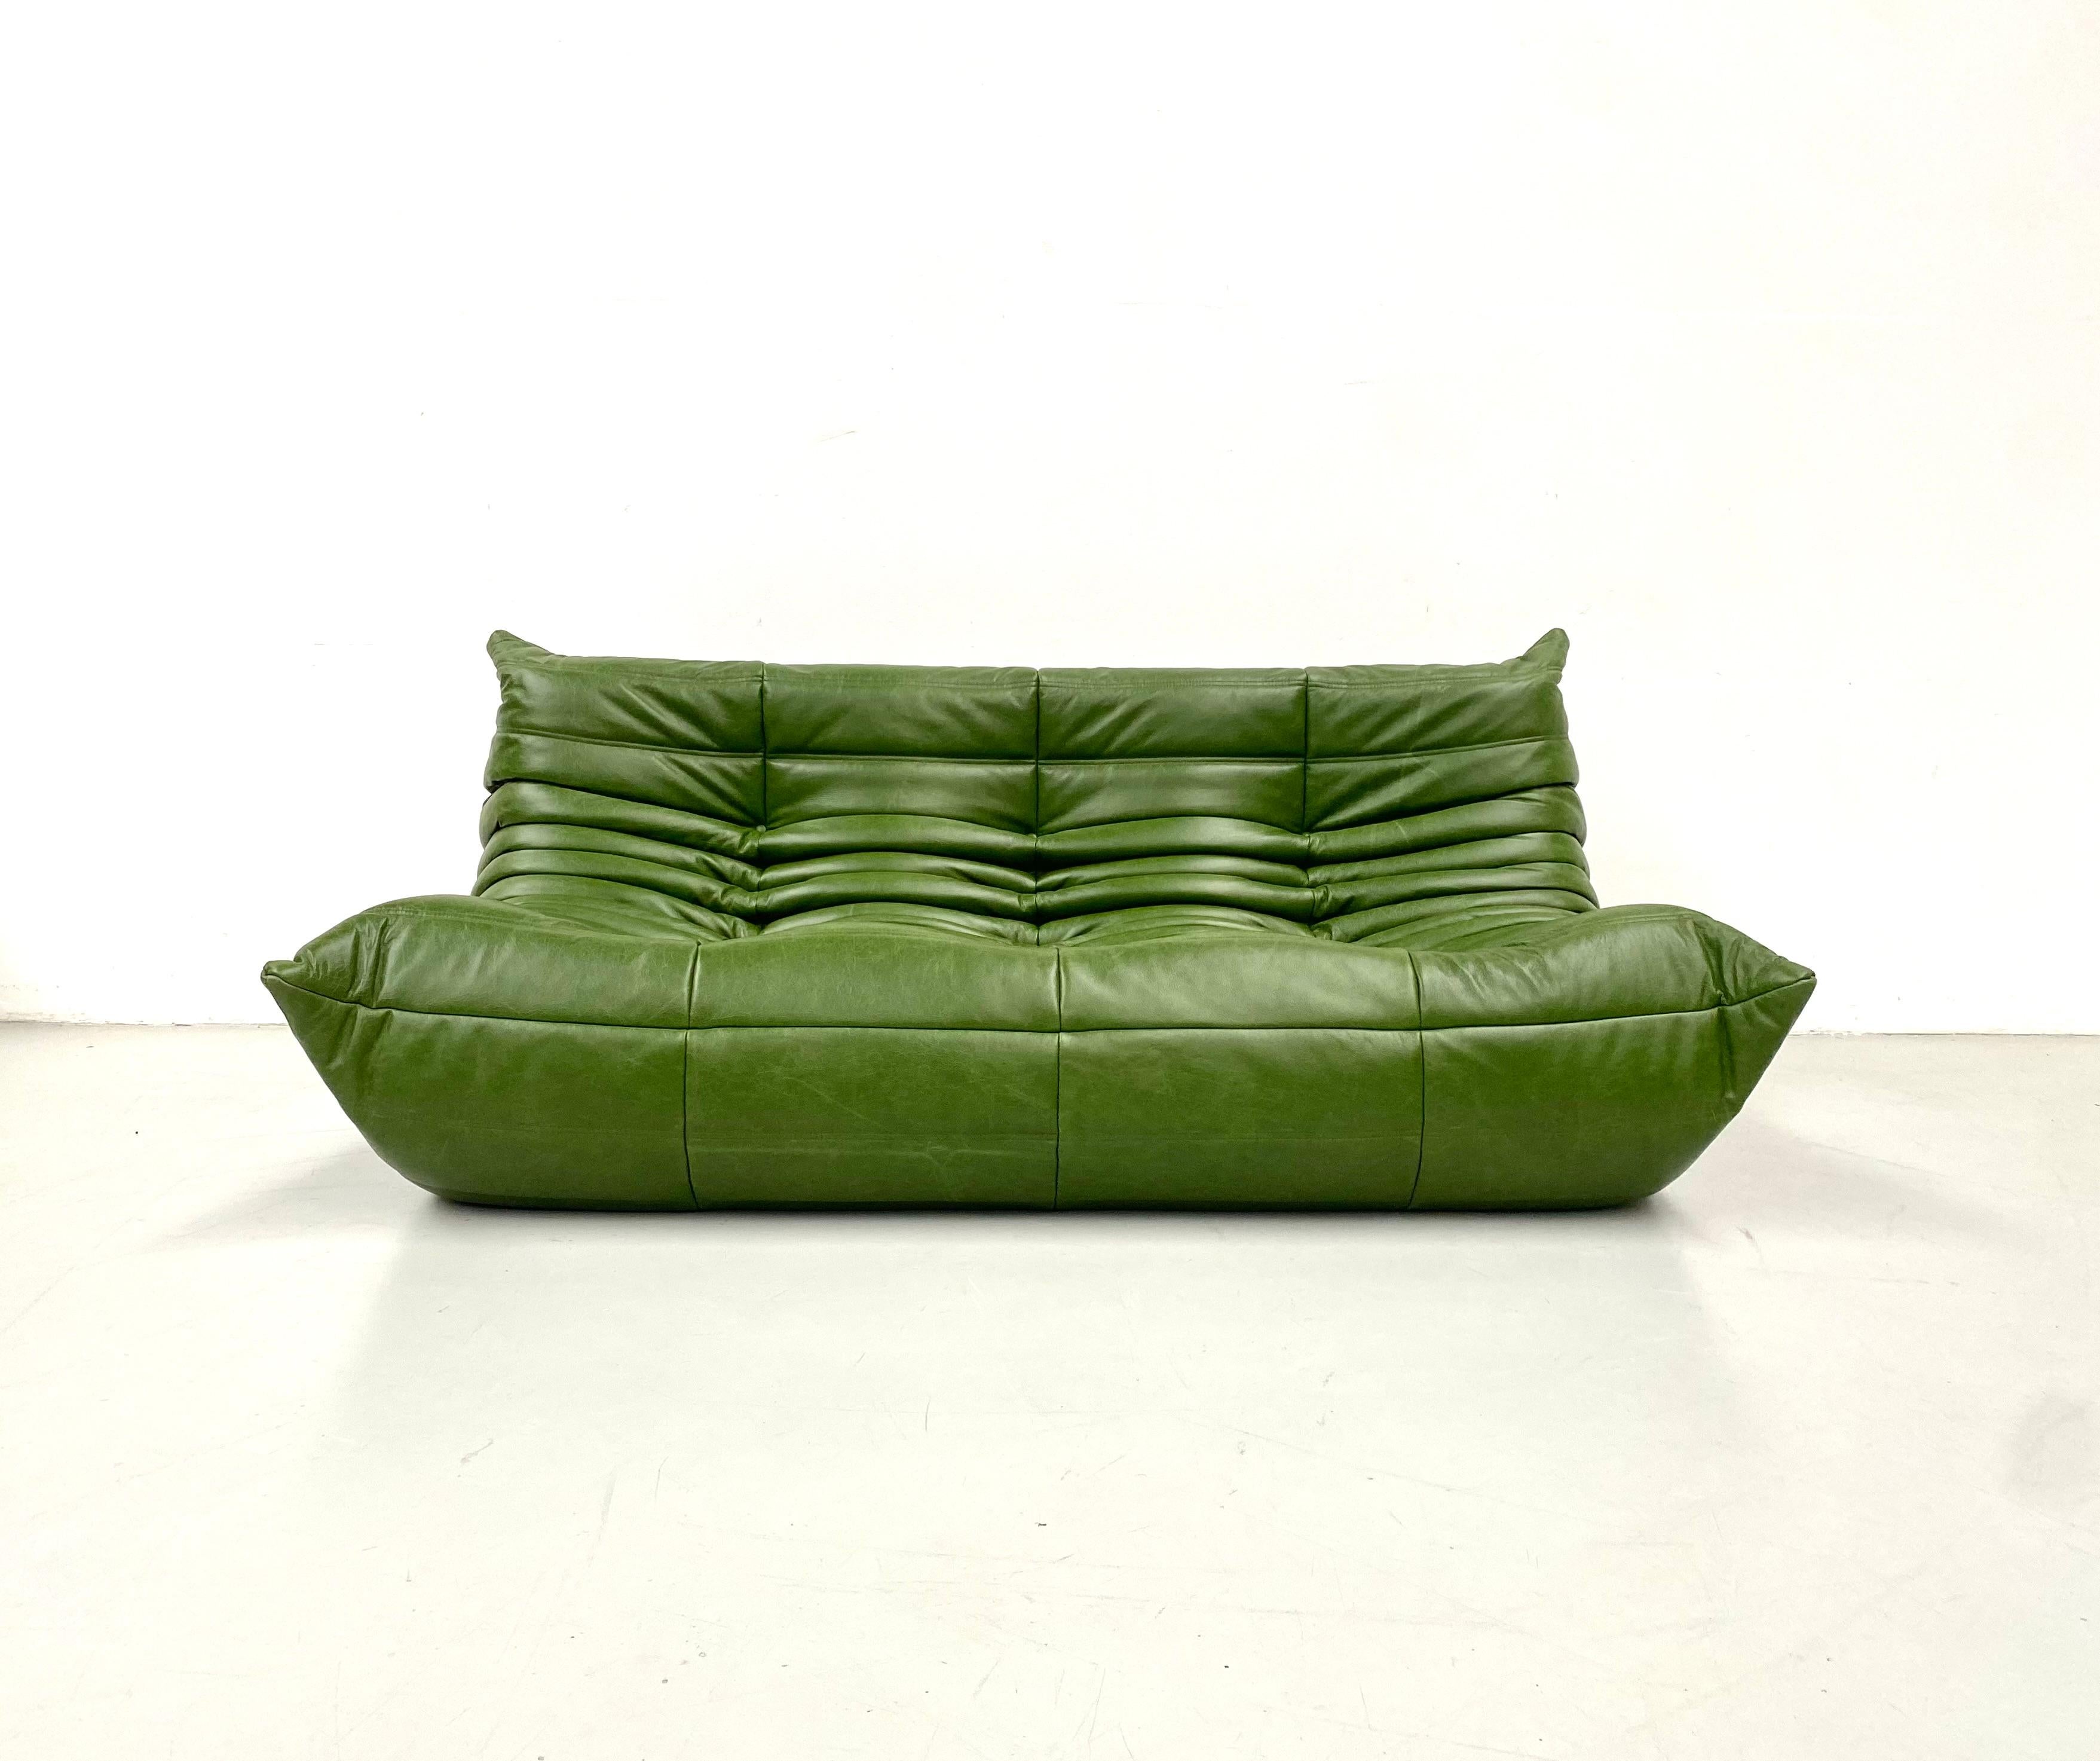 The Togo was designed by Michel Ducaroy in 1973 for Ligne Roset. It is the first sofa/chair ever made only of foam and leather. The collection features an ergonomic design with polyether foam construction and padded covers, making each piece both